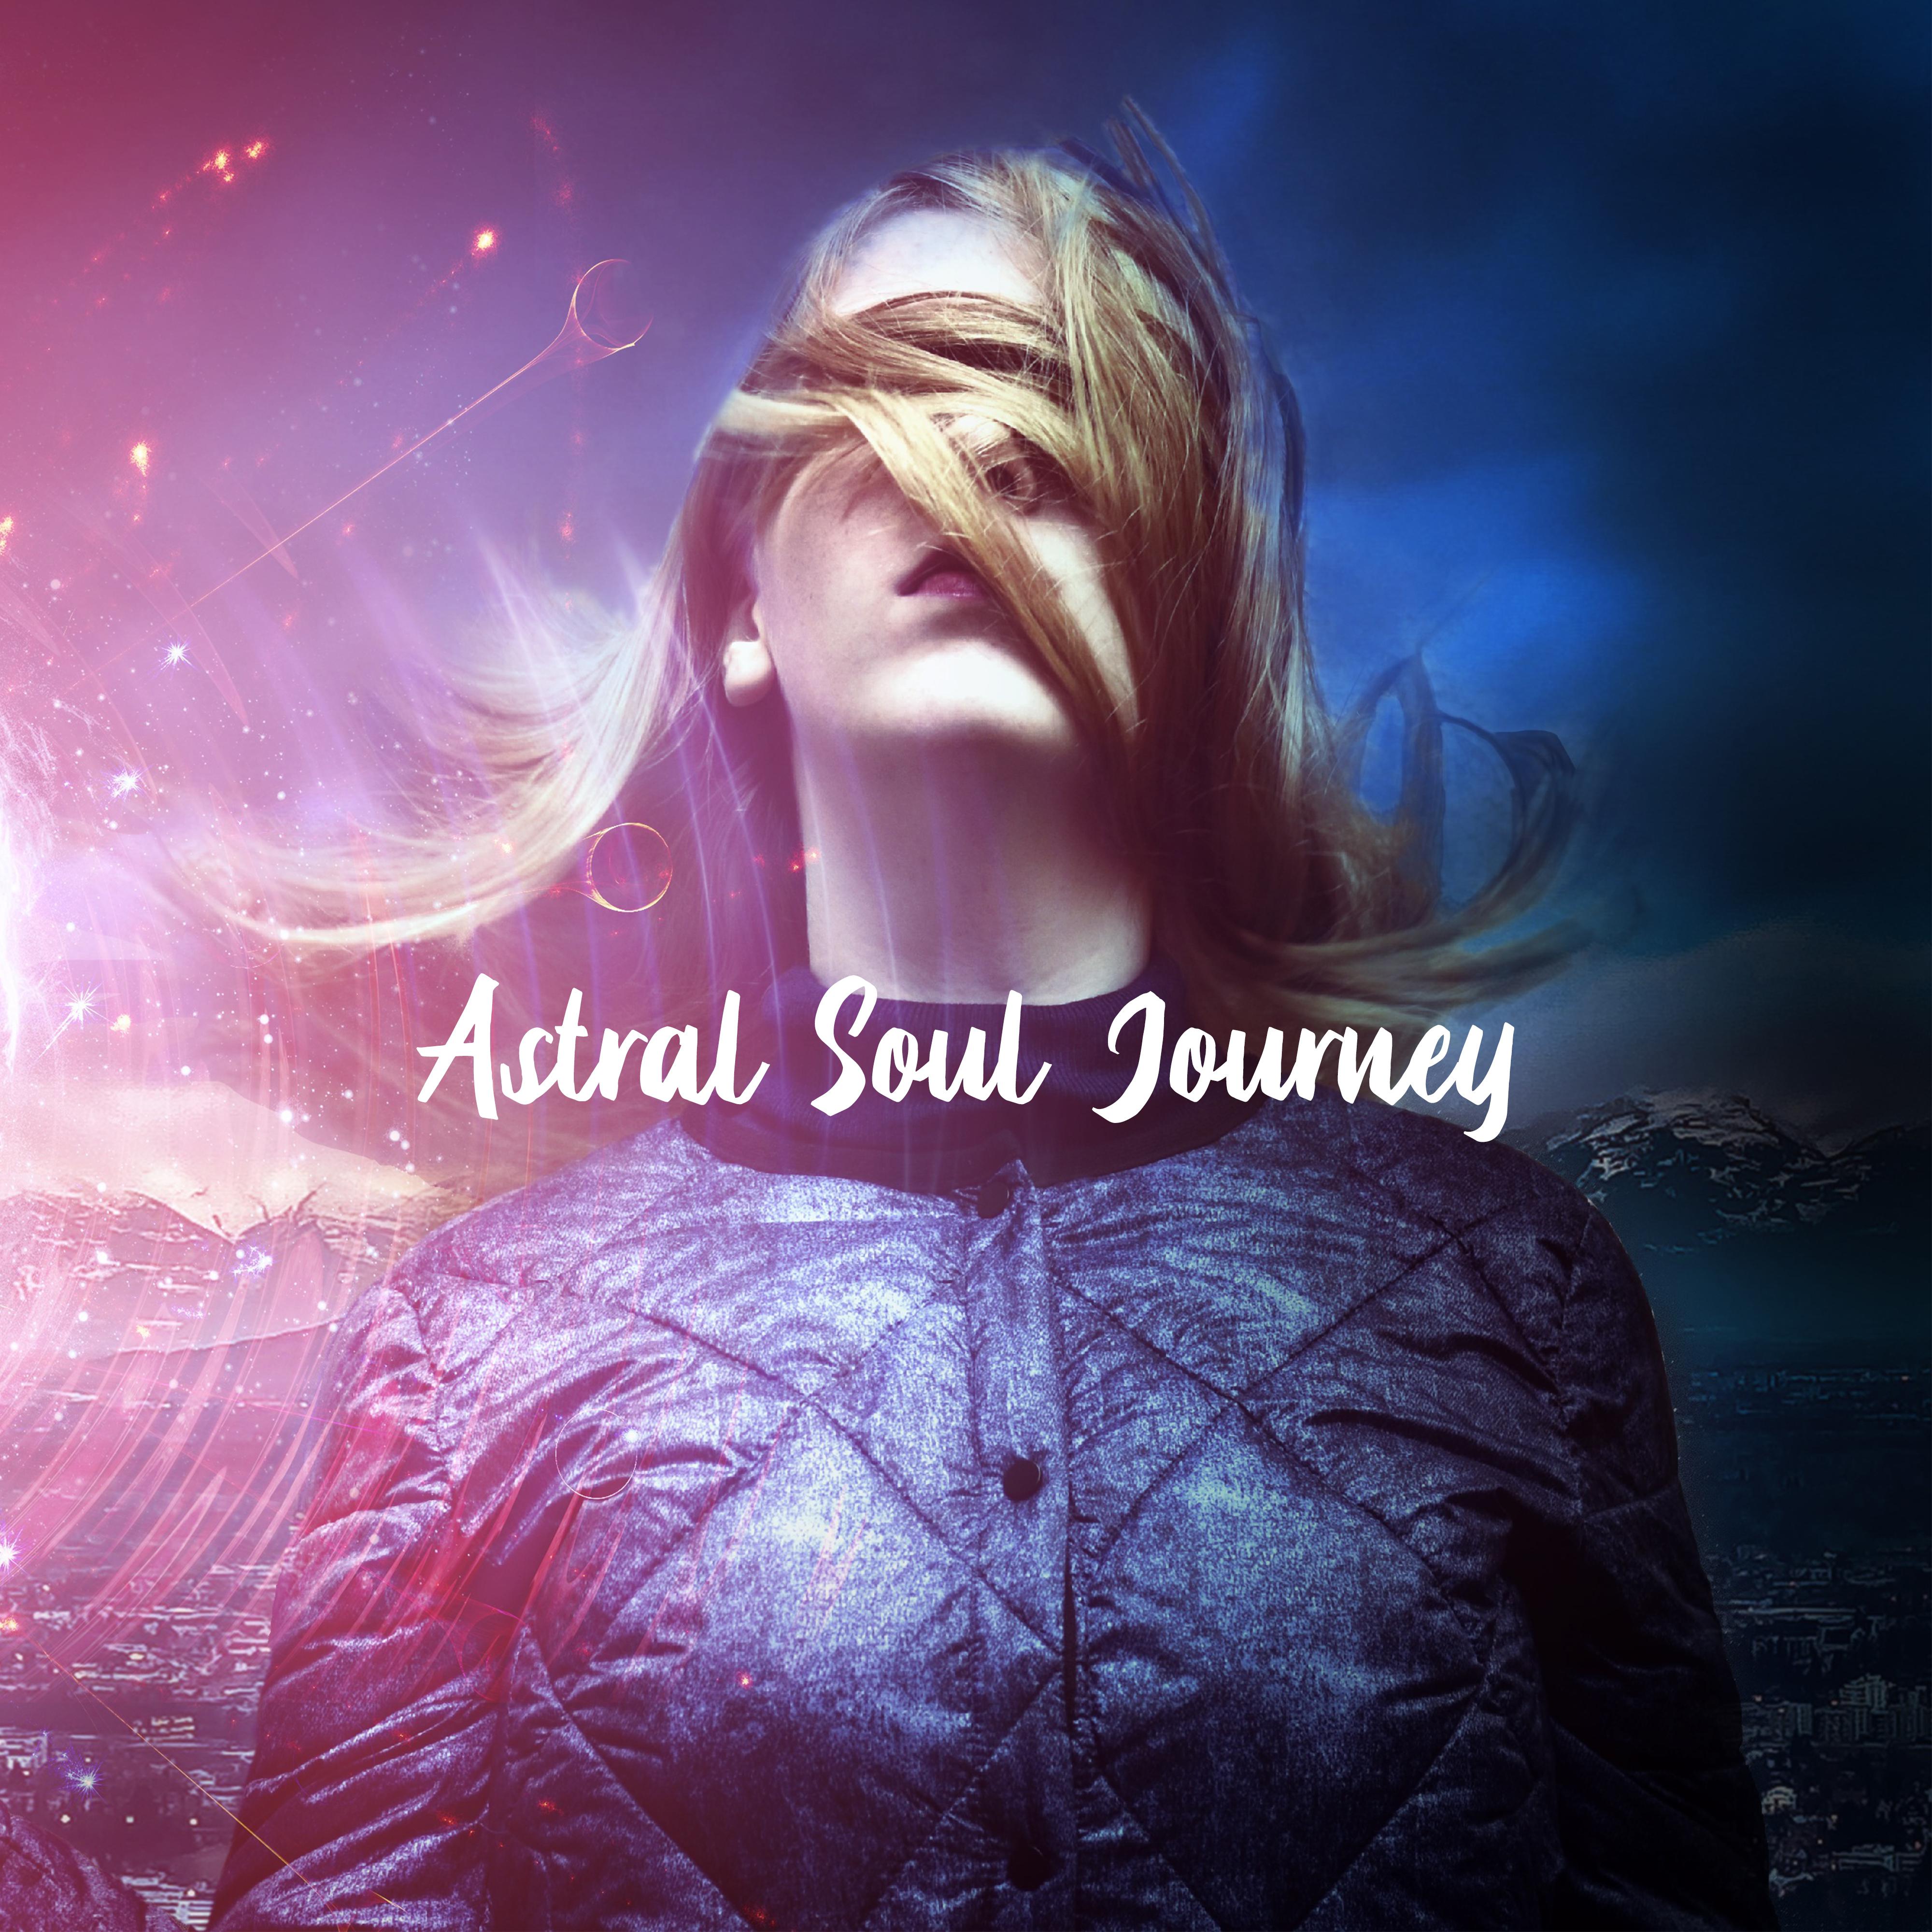 Astral Soul Journey: 15 Deep New Age Cosmic Songs for Deep Zen Meditation, Yoga Healing Experience, 2019 Music for Total Relax for Body & Soul